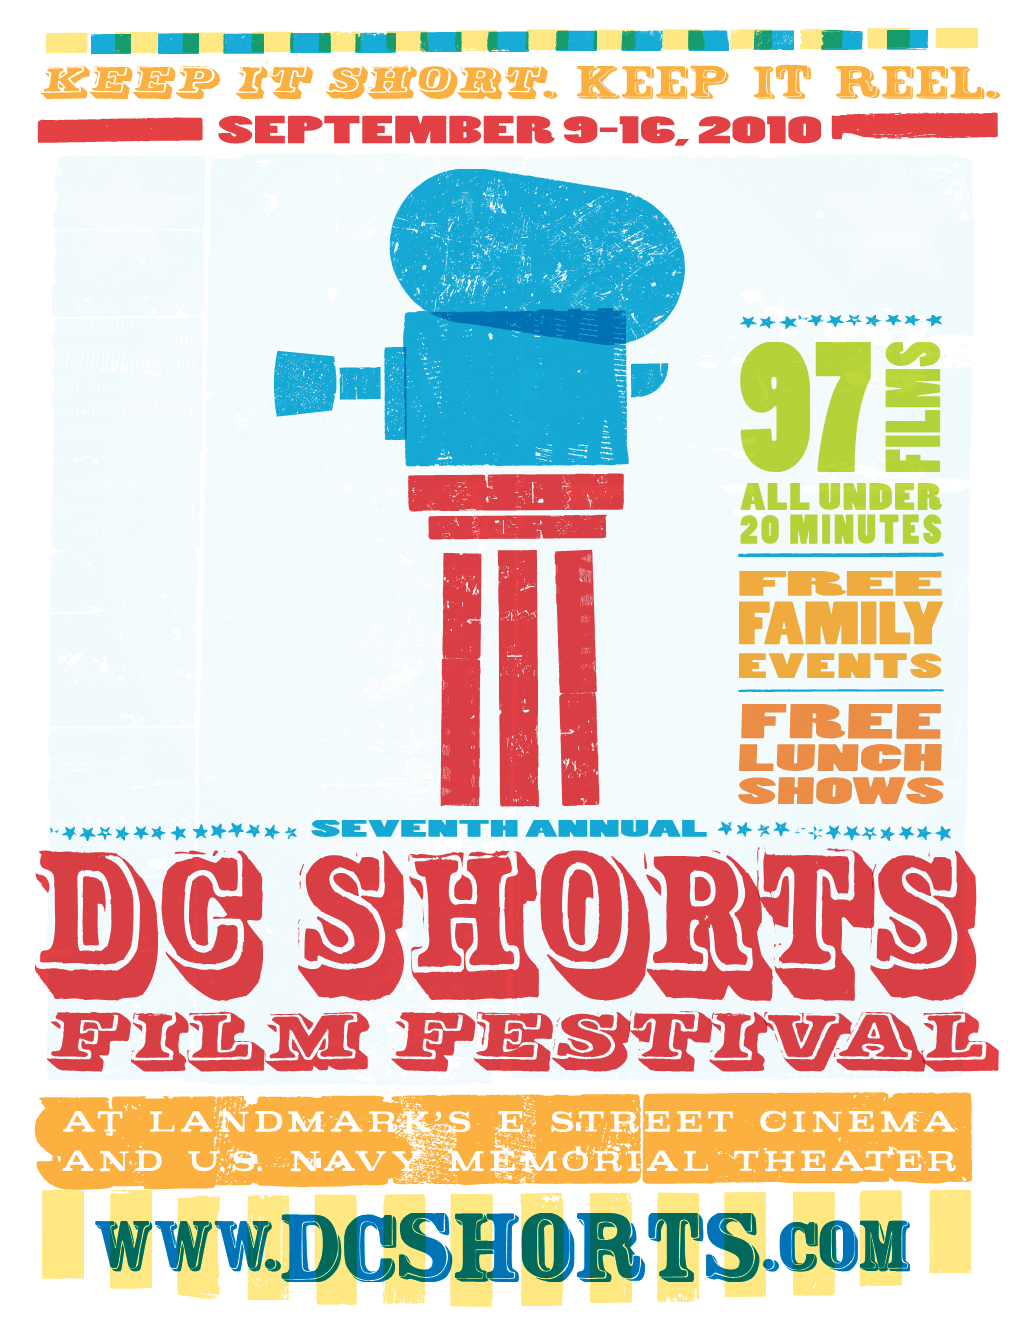 Tickets and Passes Are on Sale Now at Dcshorts.Com Simply Go to the “Tickets” Page and Select the Events You Wish to Attend!